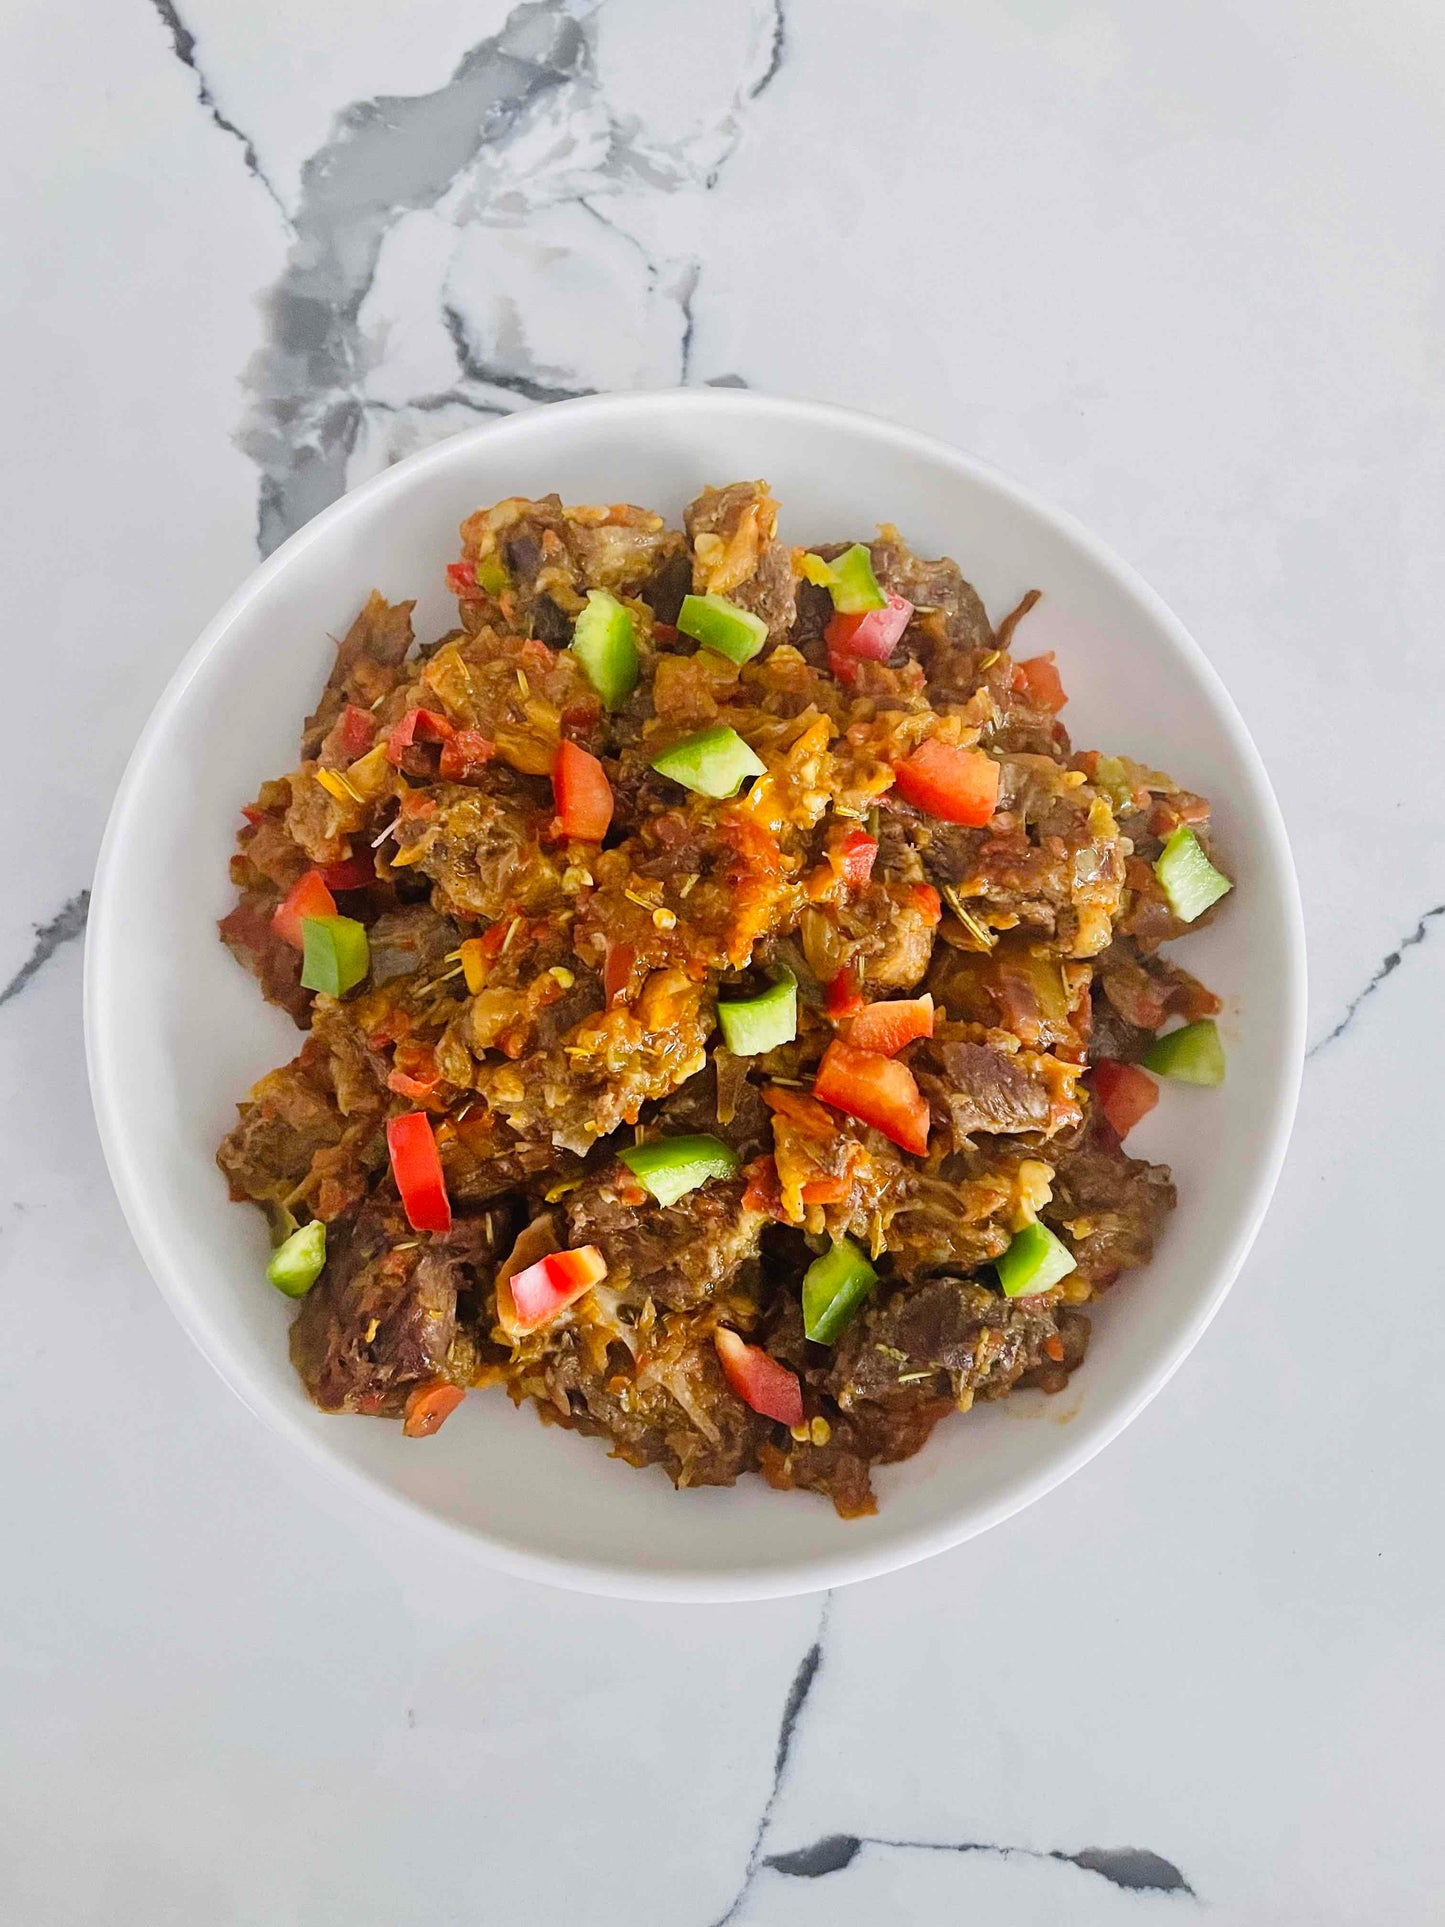 Asun (Peppered Goat Meat)